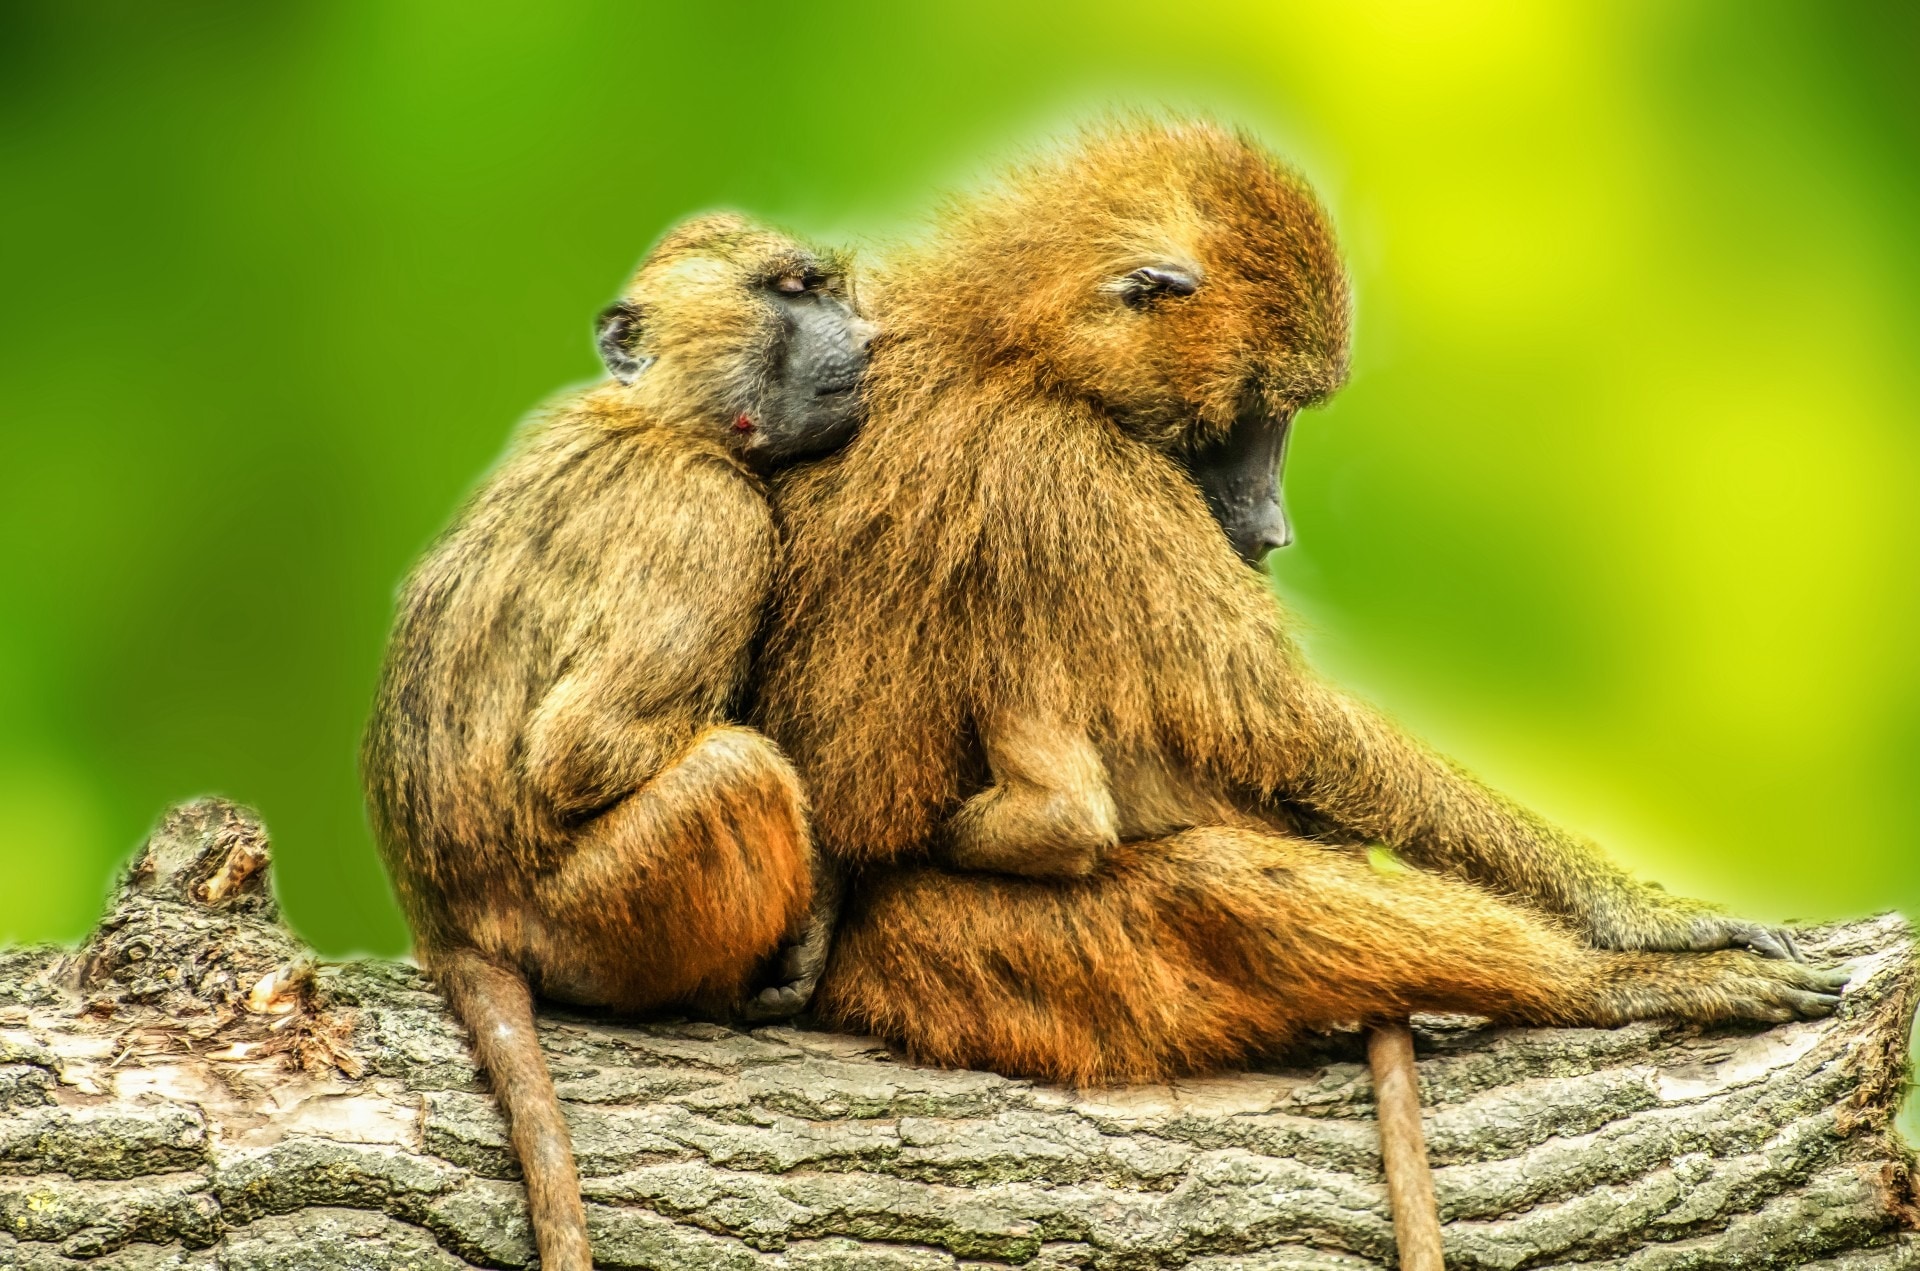 Animals, Baboons, Brown, Couple, Day, animal wildlife, animals in the wild